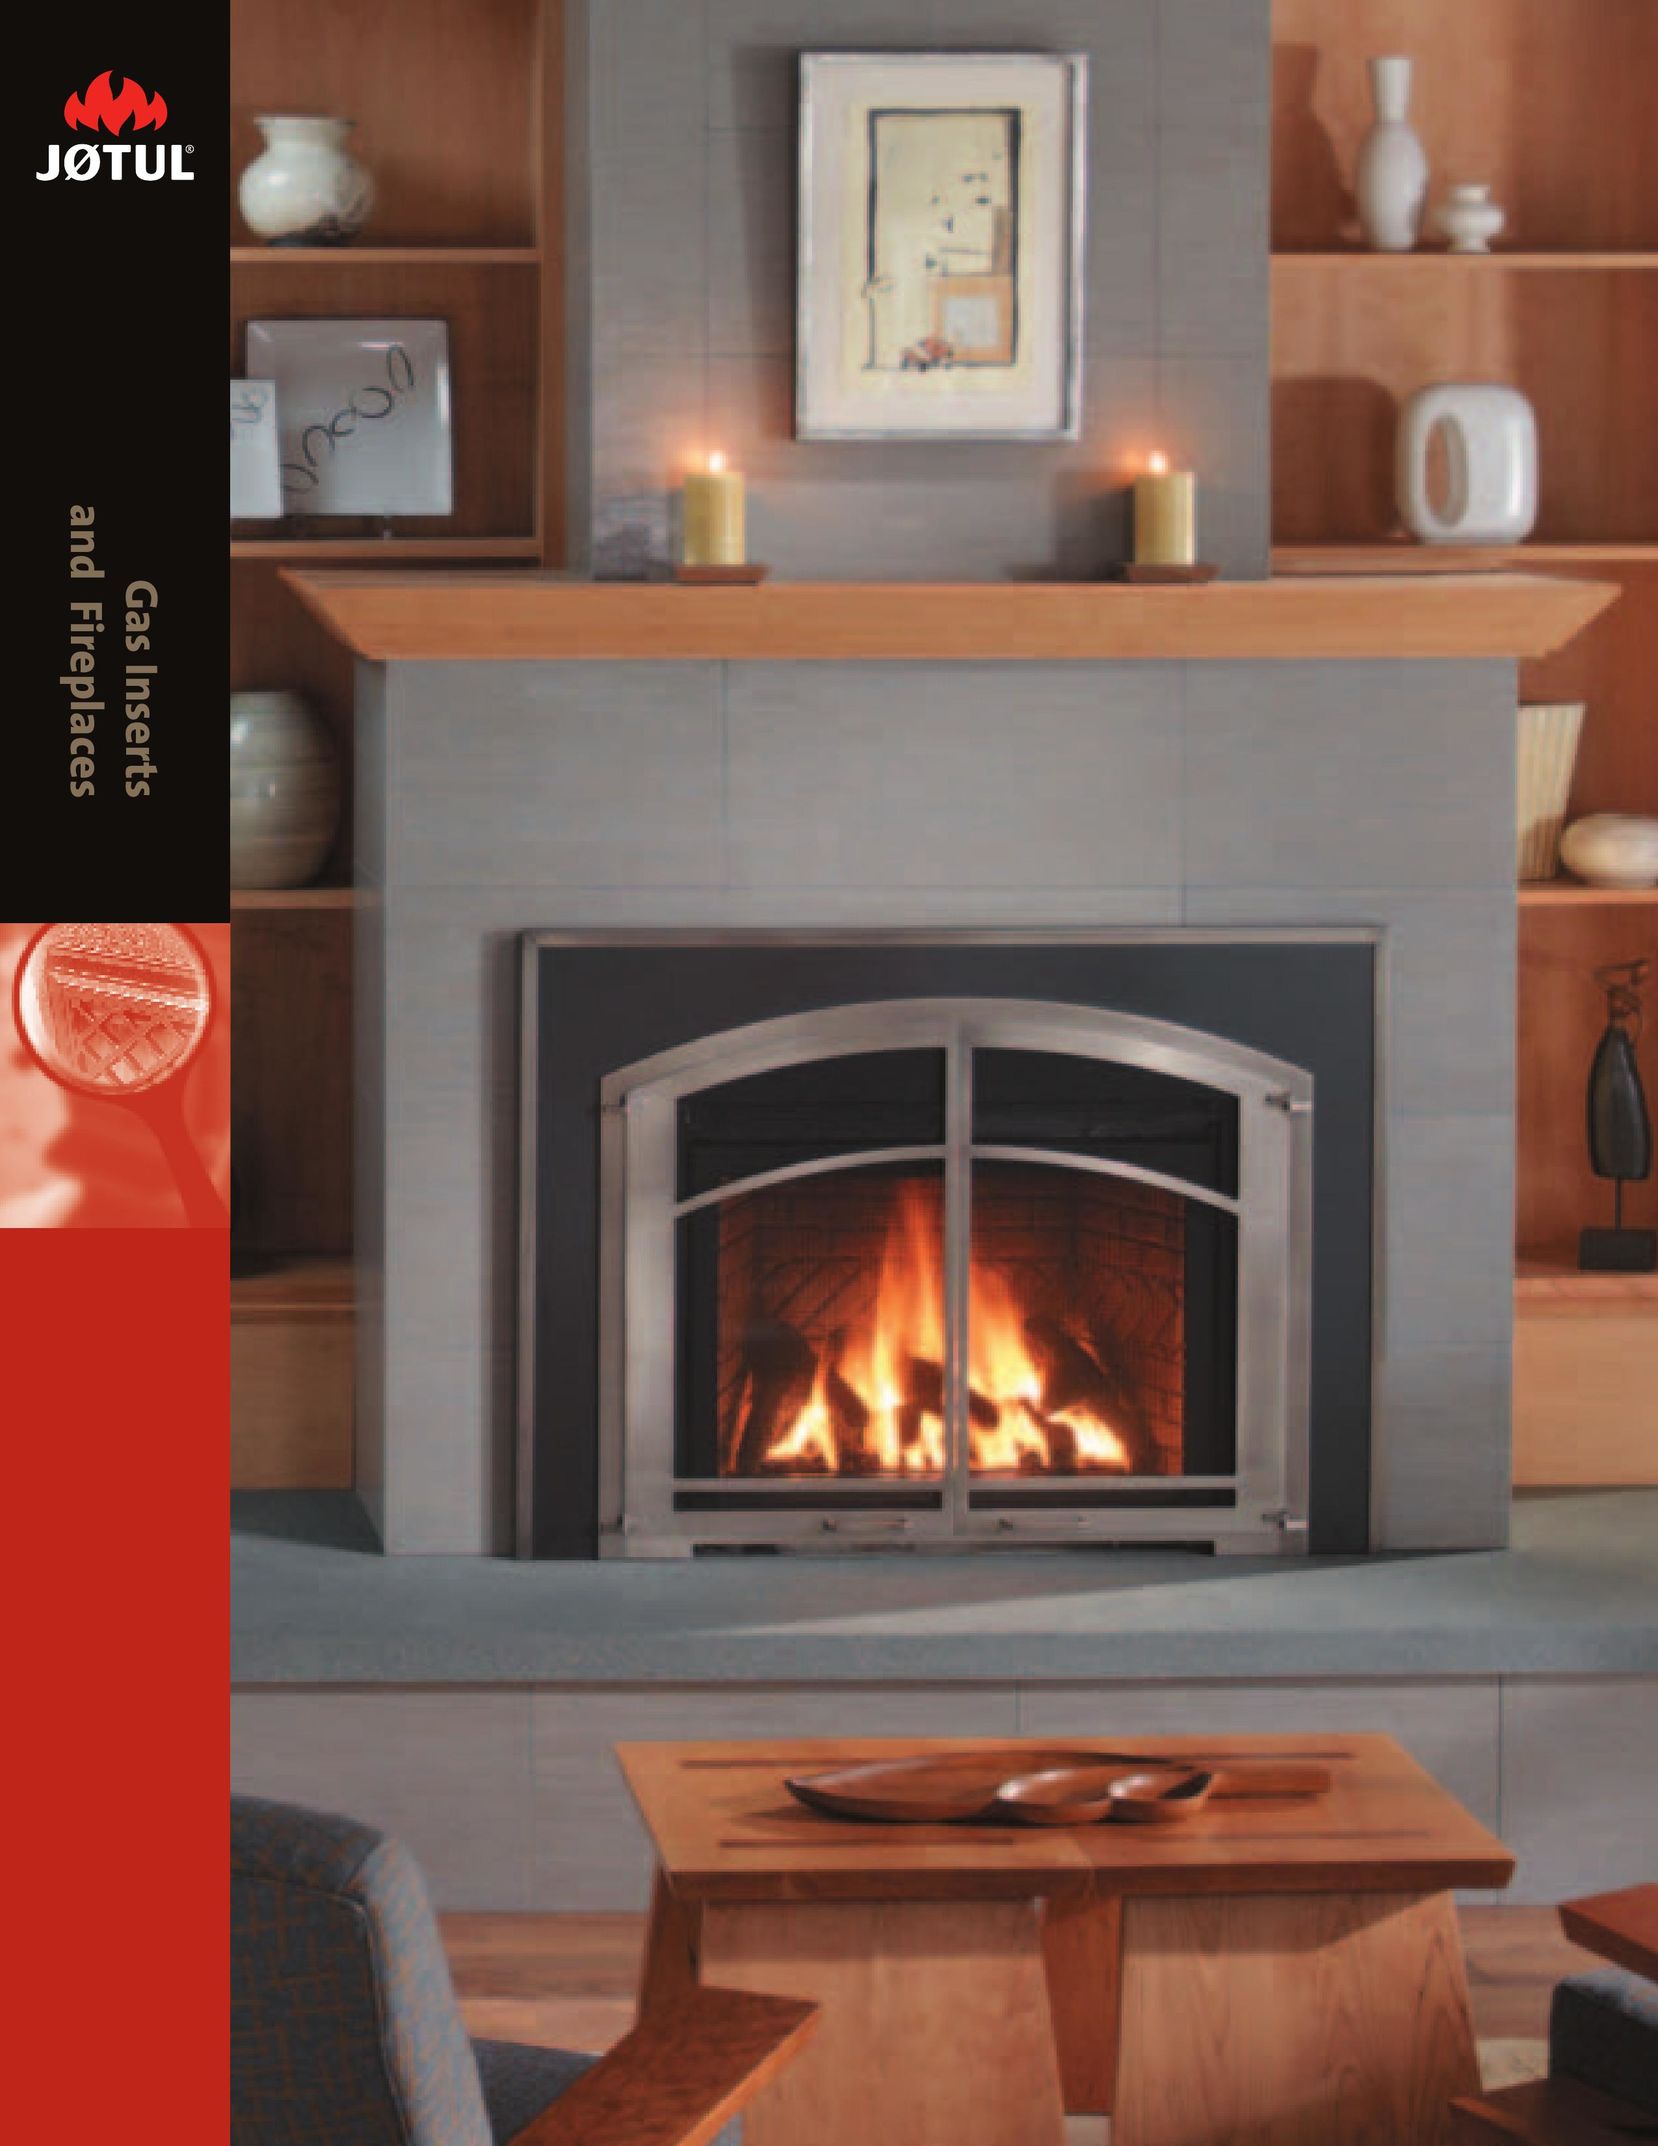 Jotul Gas Inserts and Fireplaces Indoor Fireplace User Manual